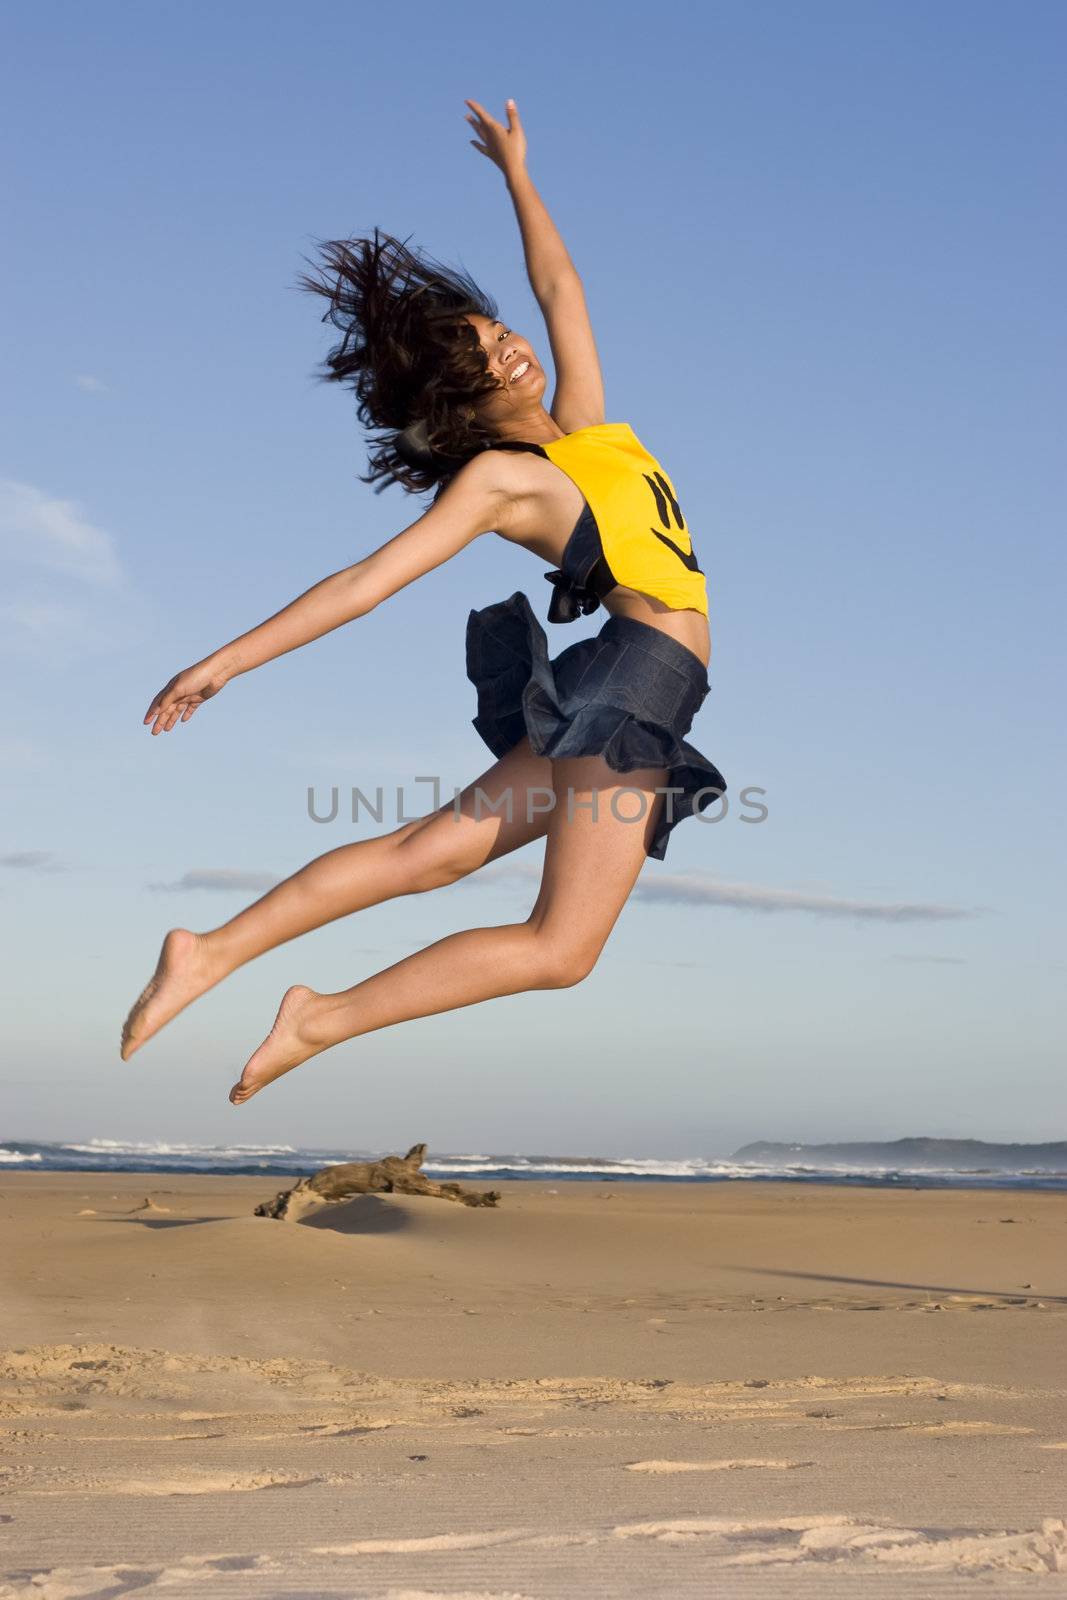 Girl with "happy Face" top on jumping in the air